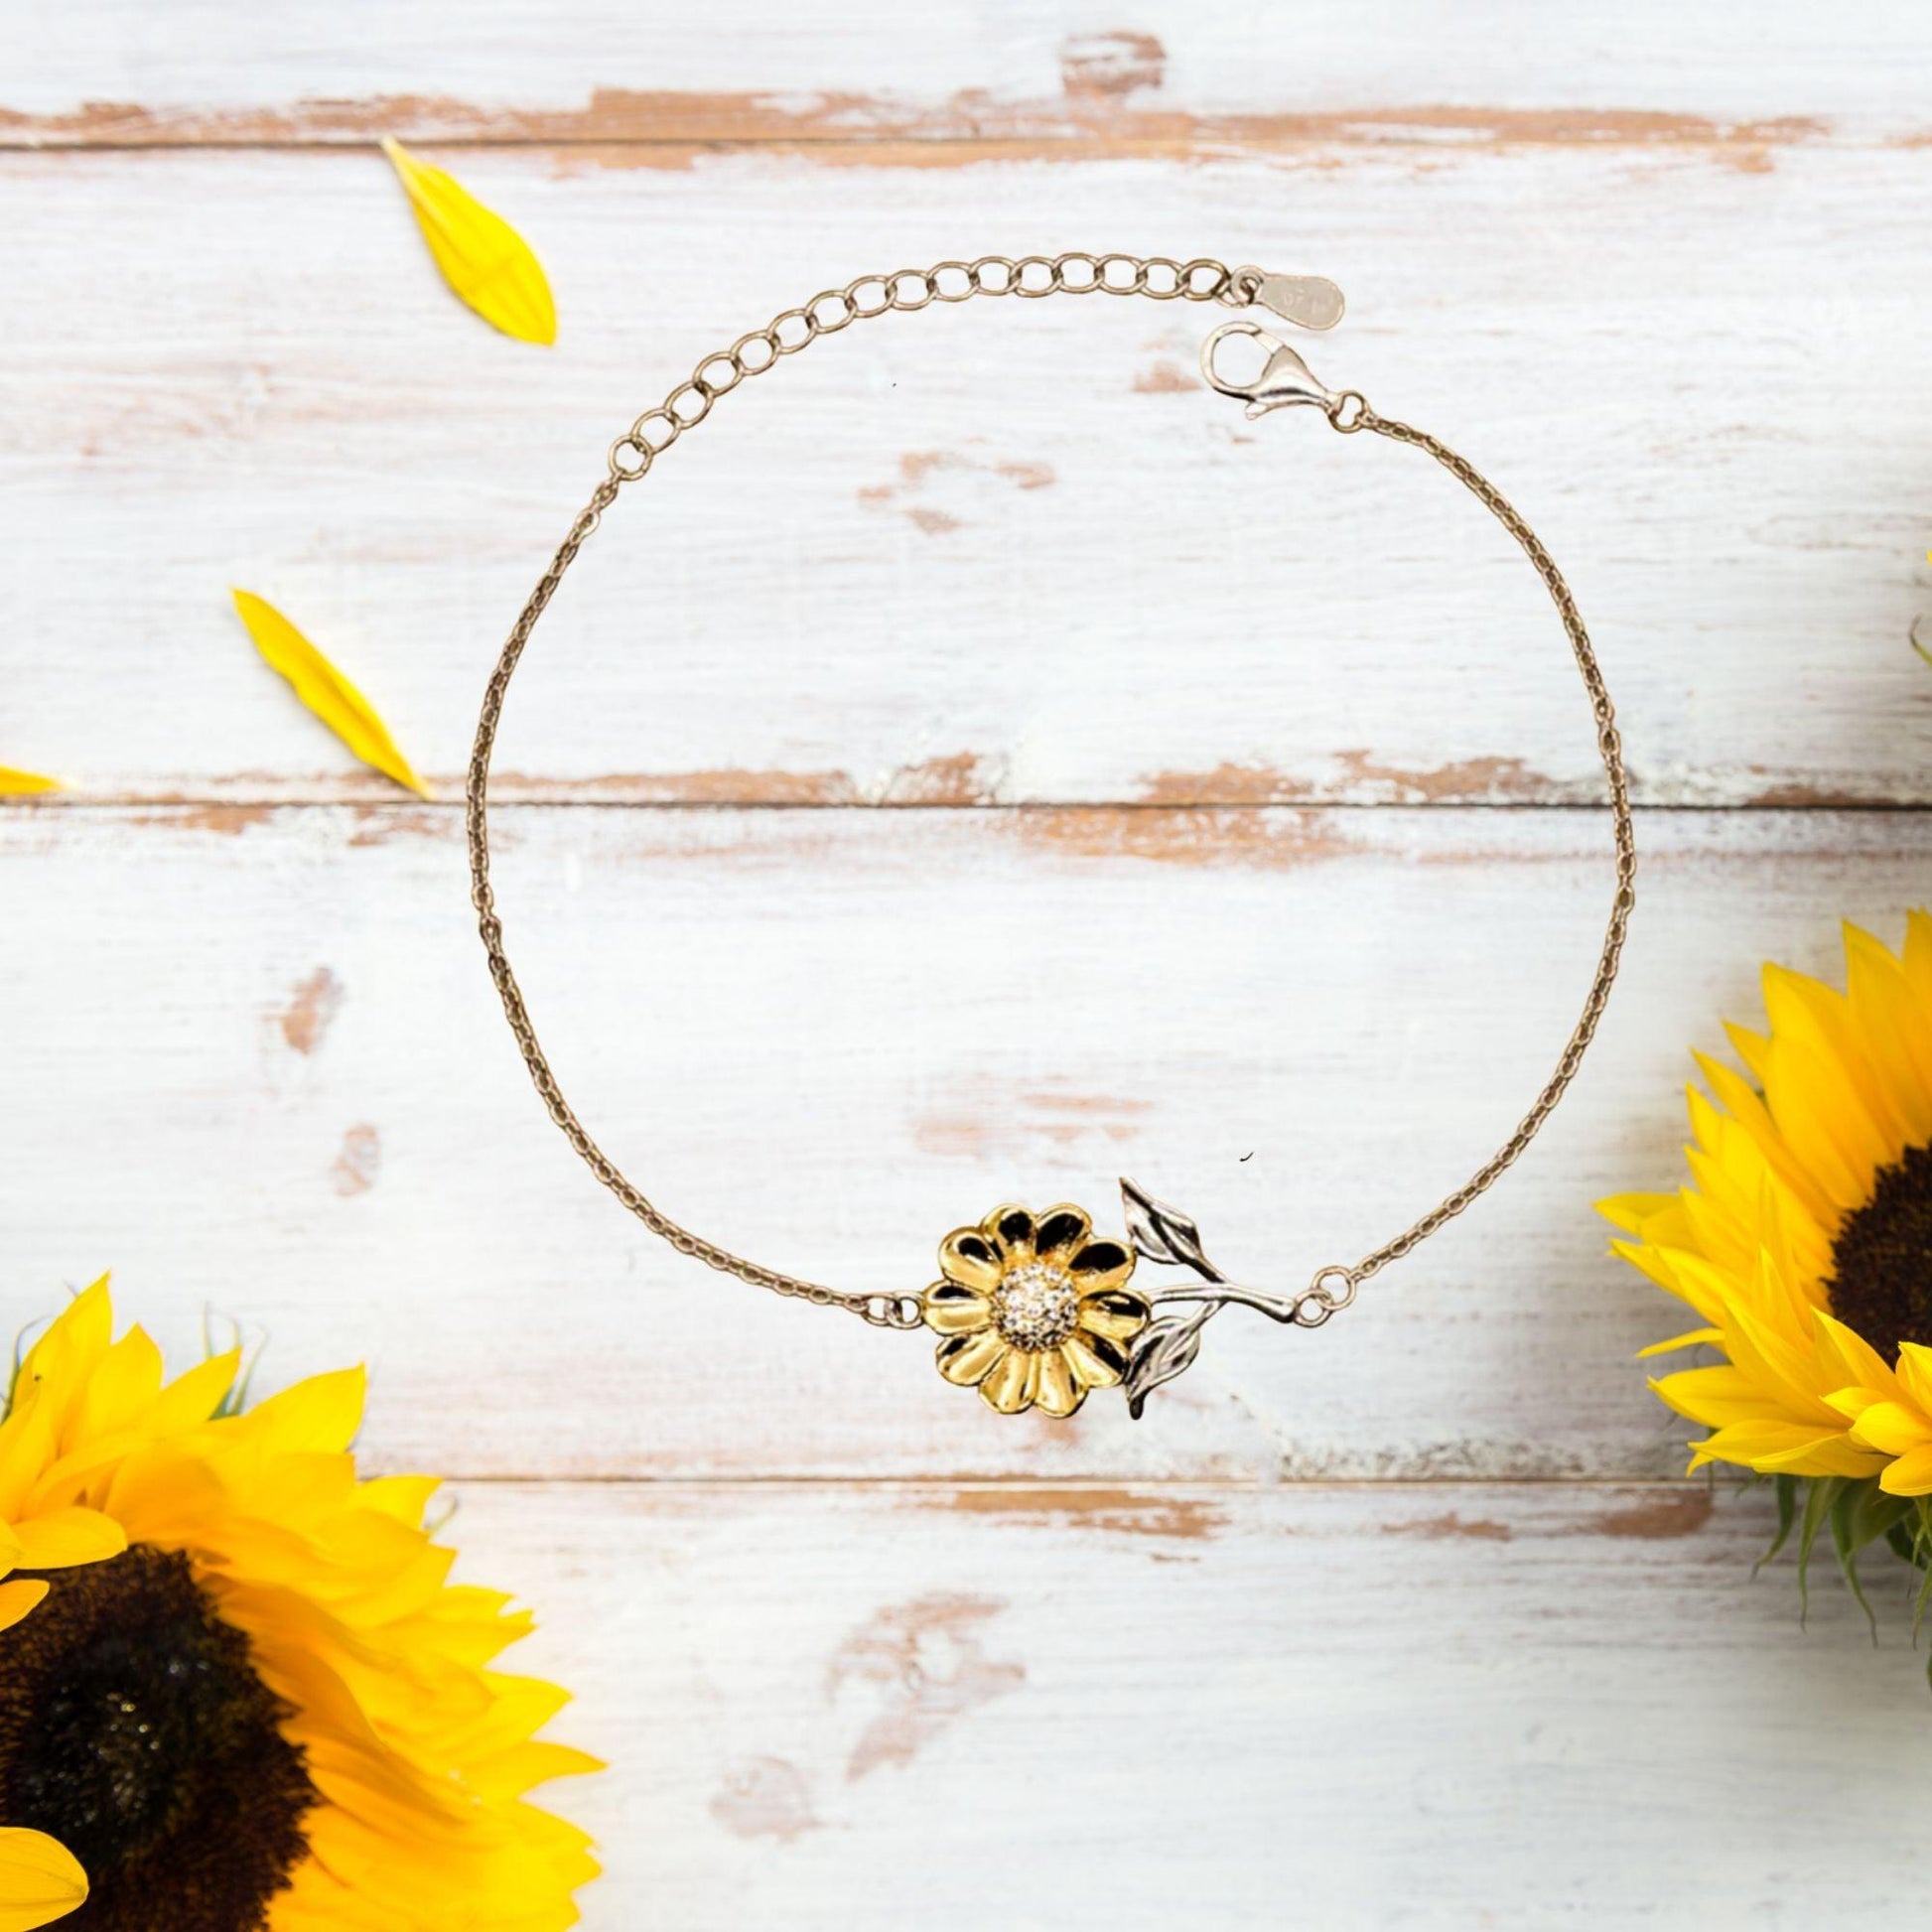 Remarkable Linguist Gifts, Your dedication and hard work, Inspirational Birthday Christmas Unique Sunflower Bracelet For Linguist, Coworkers, Men, Women, Friends - Mallard Moon Gift Shop